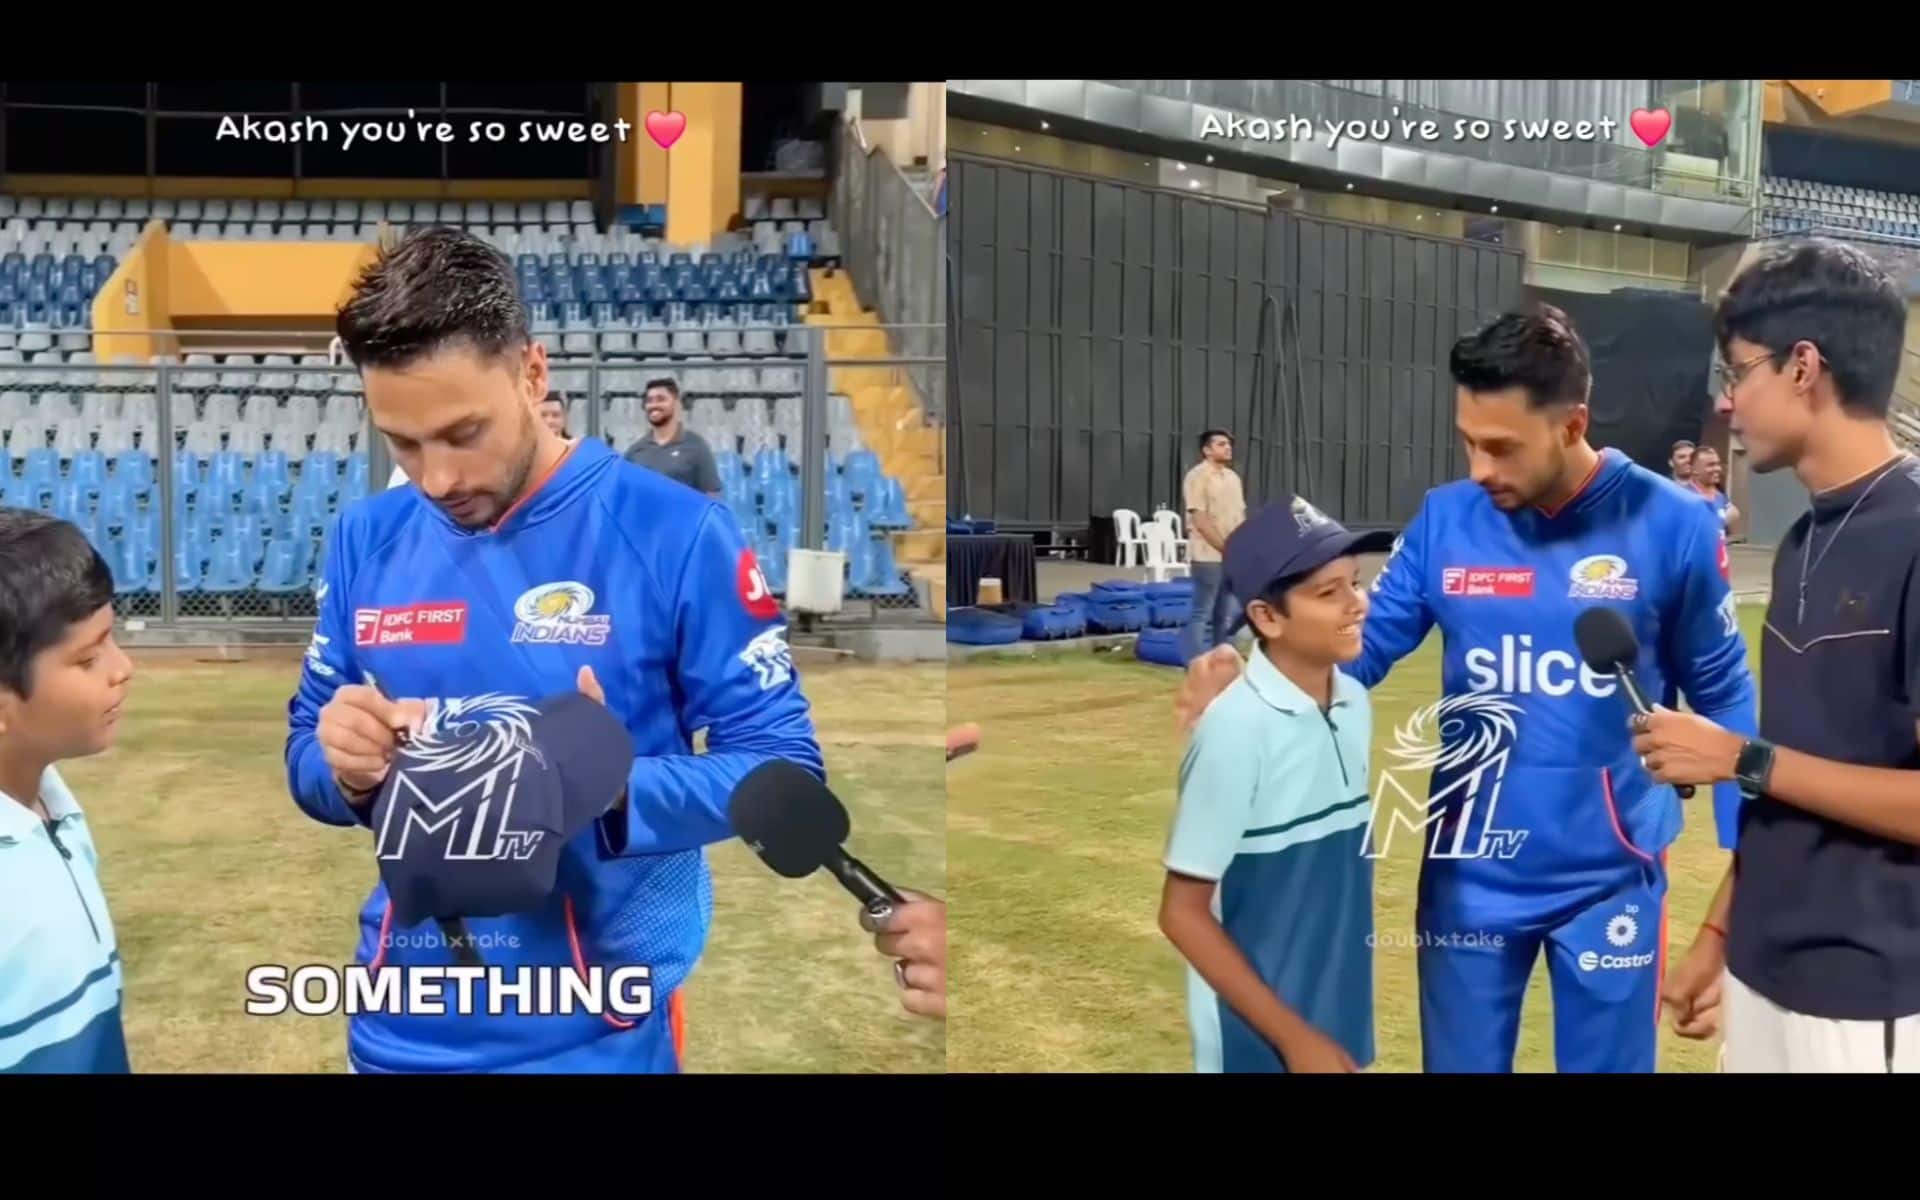 Akash Madhwal's heartfelt moment with a young cricketer